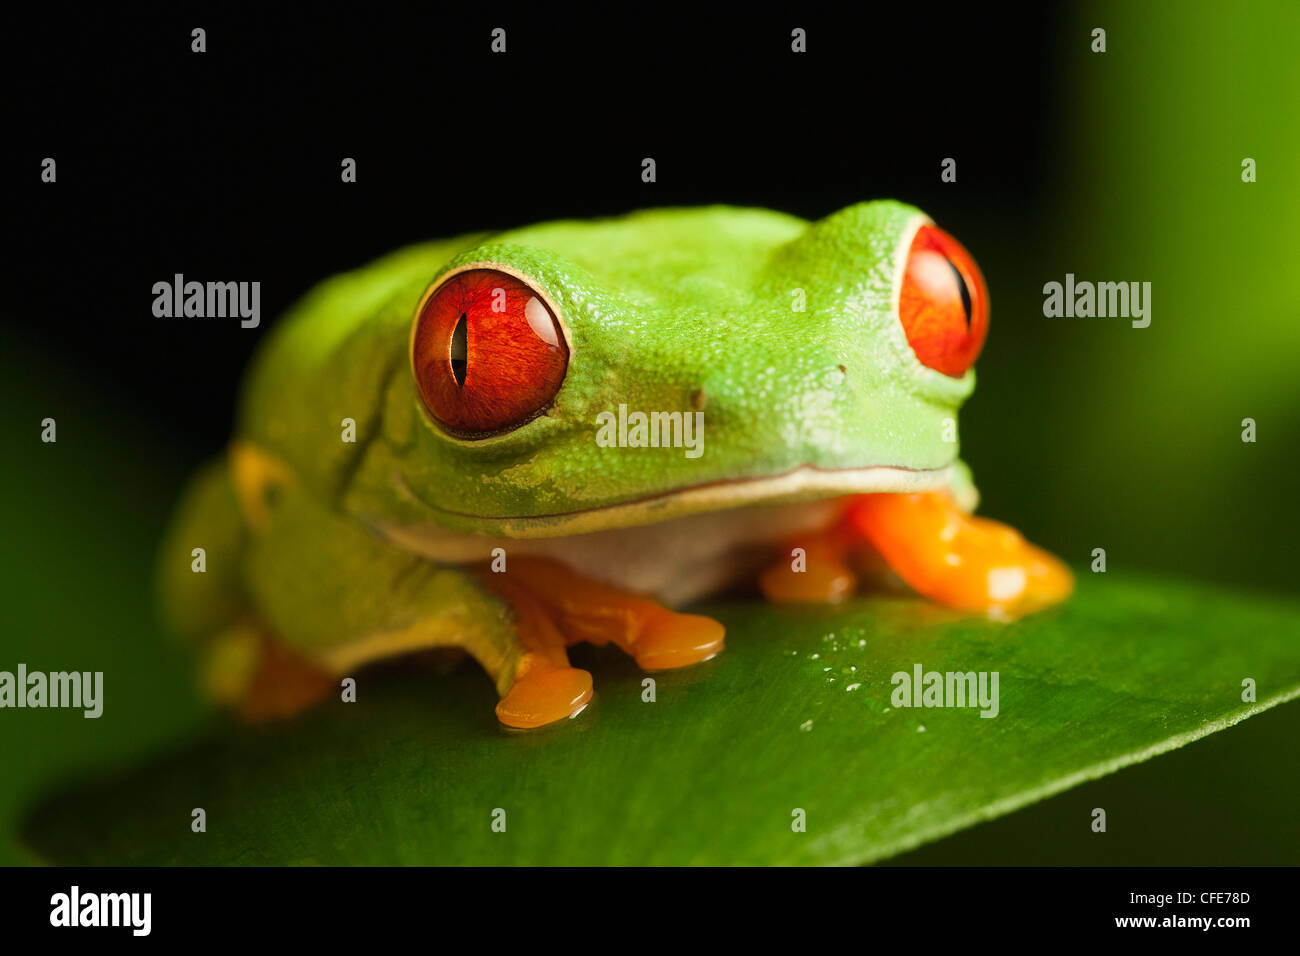 Red-eyed tree frog. Banque D'Images